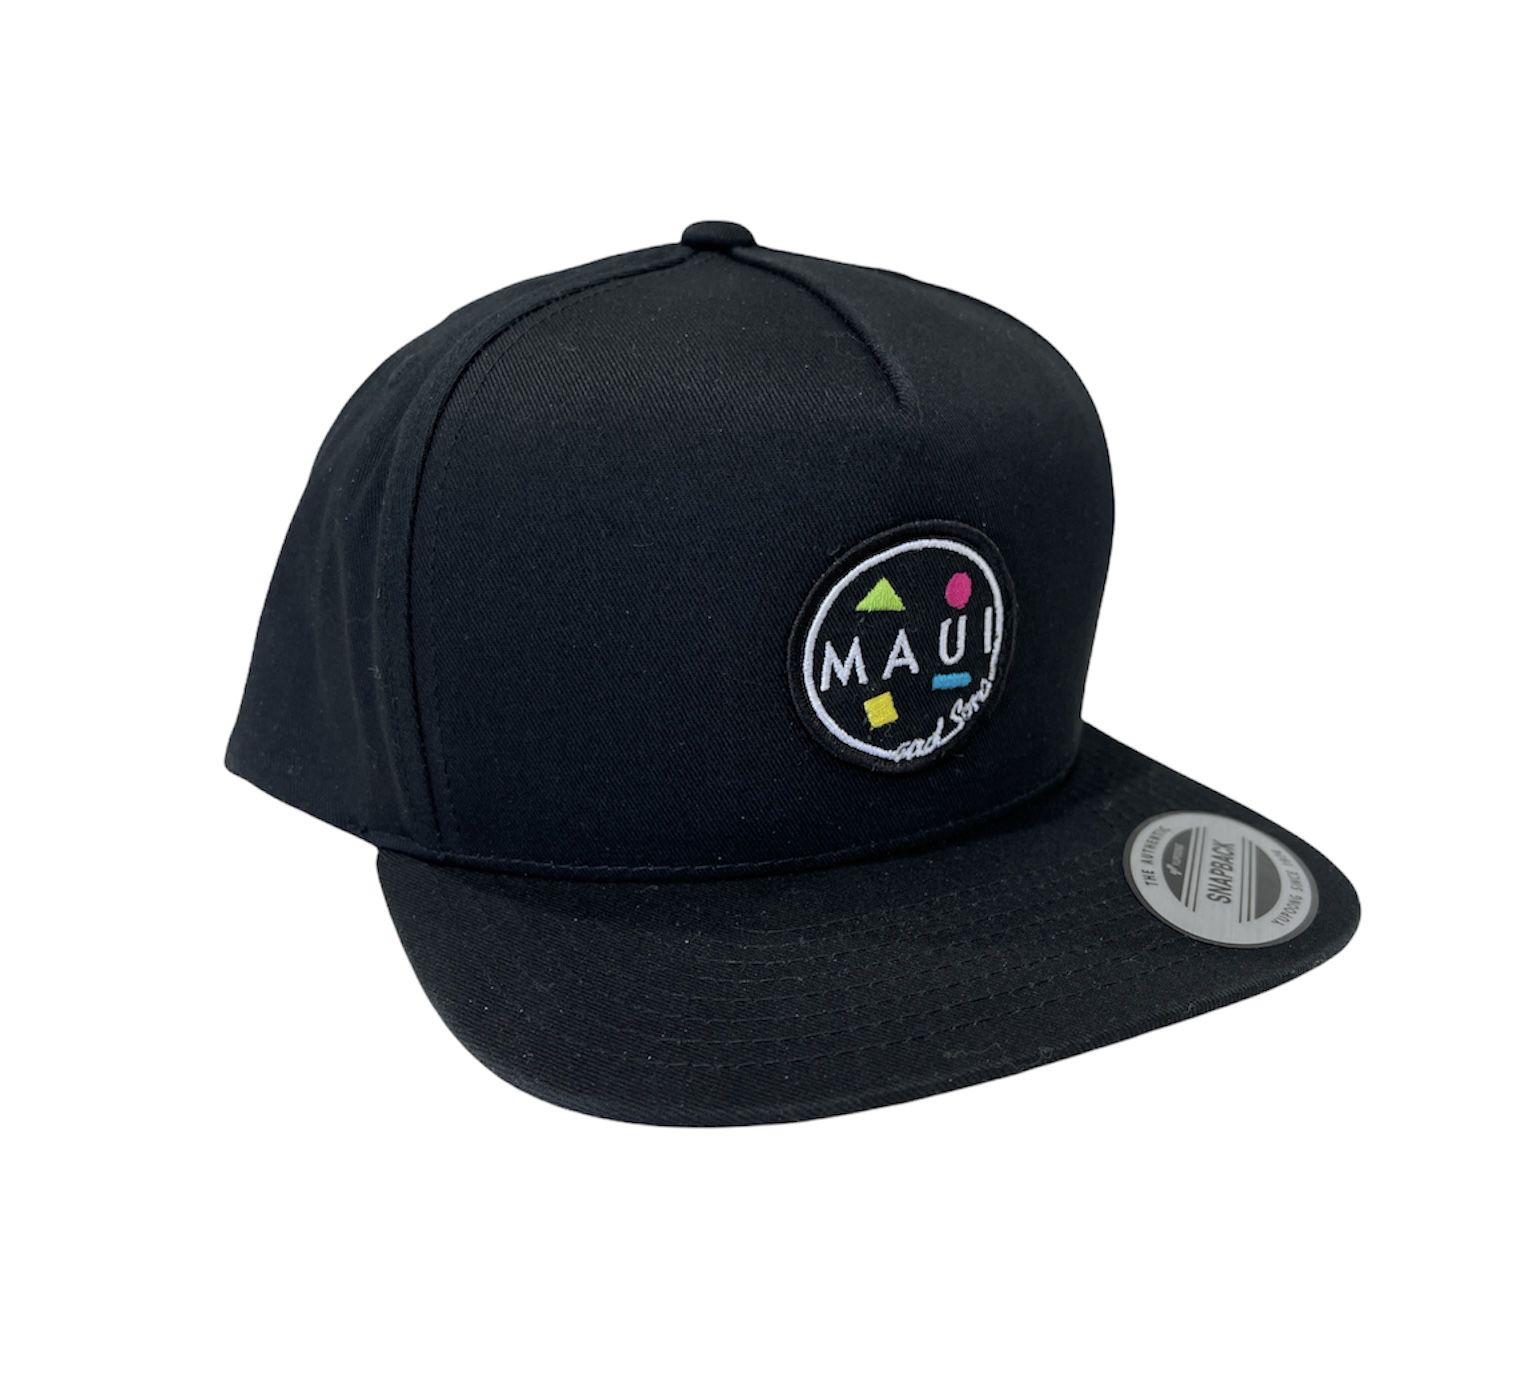 New Black Surf Maui And Son Cookie Logo Neon Hat